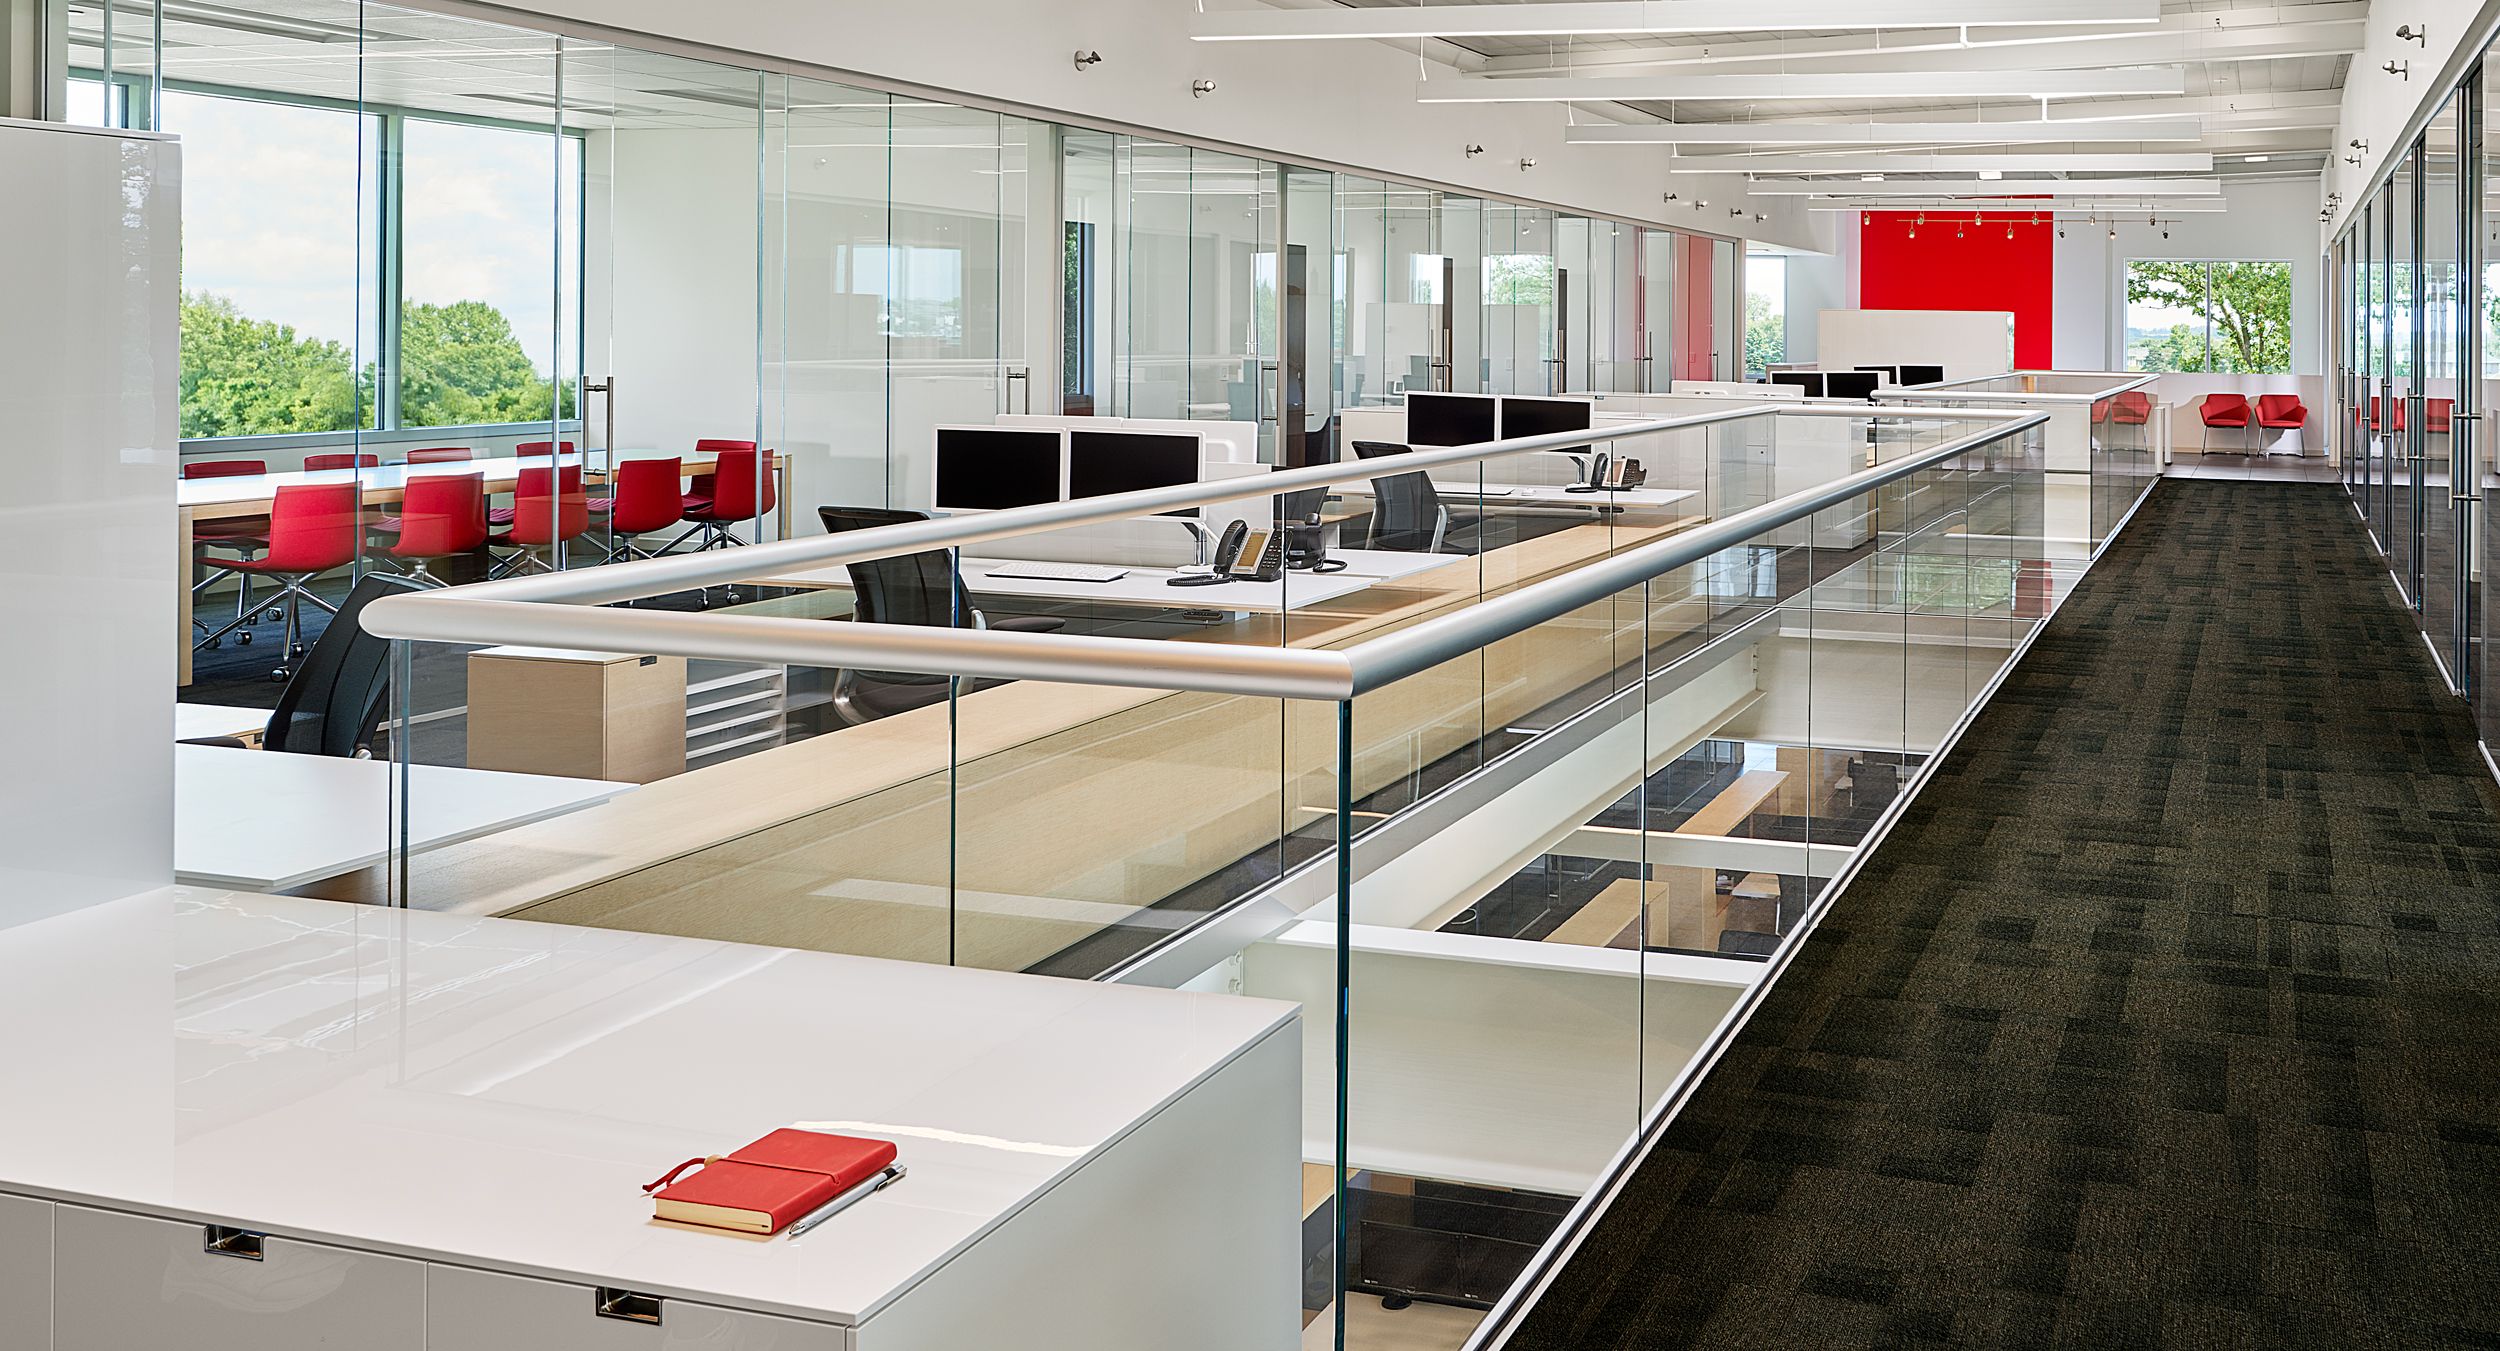 Our all-new HALCON Headquarters showcases our commitment to design and innovation.